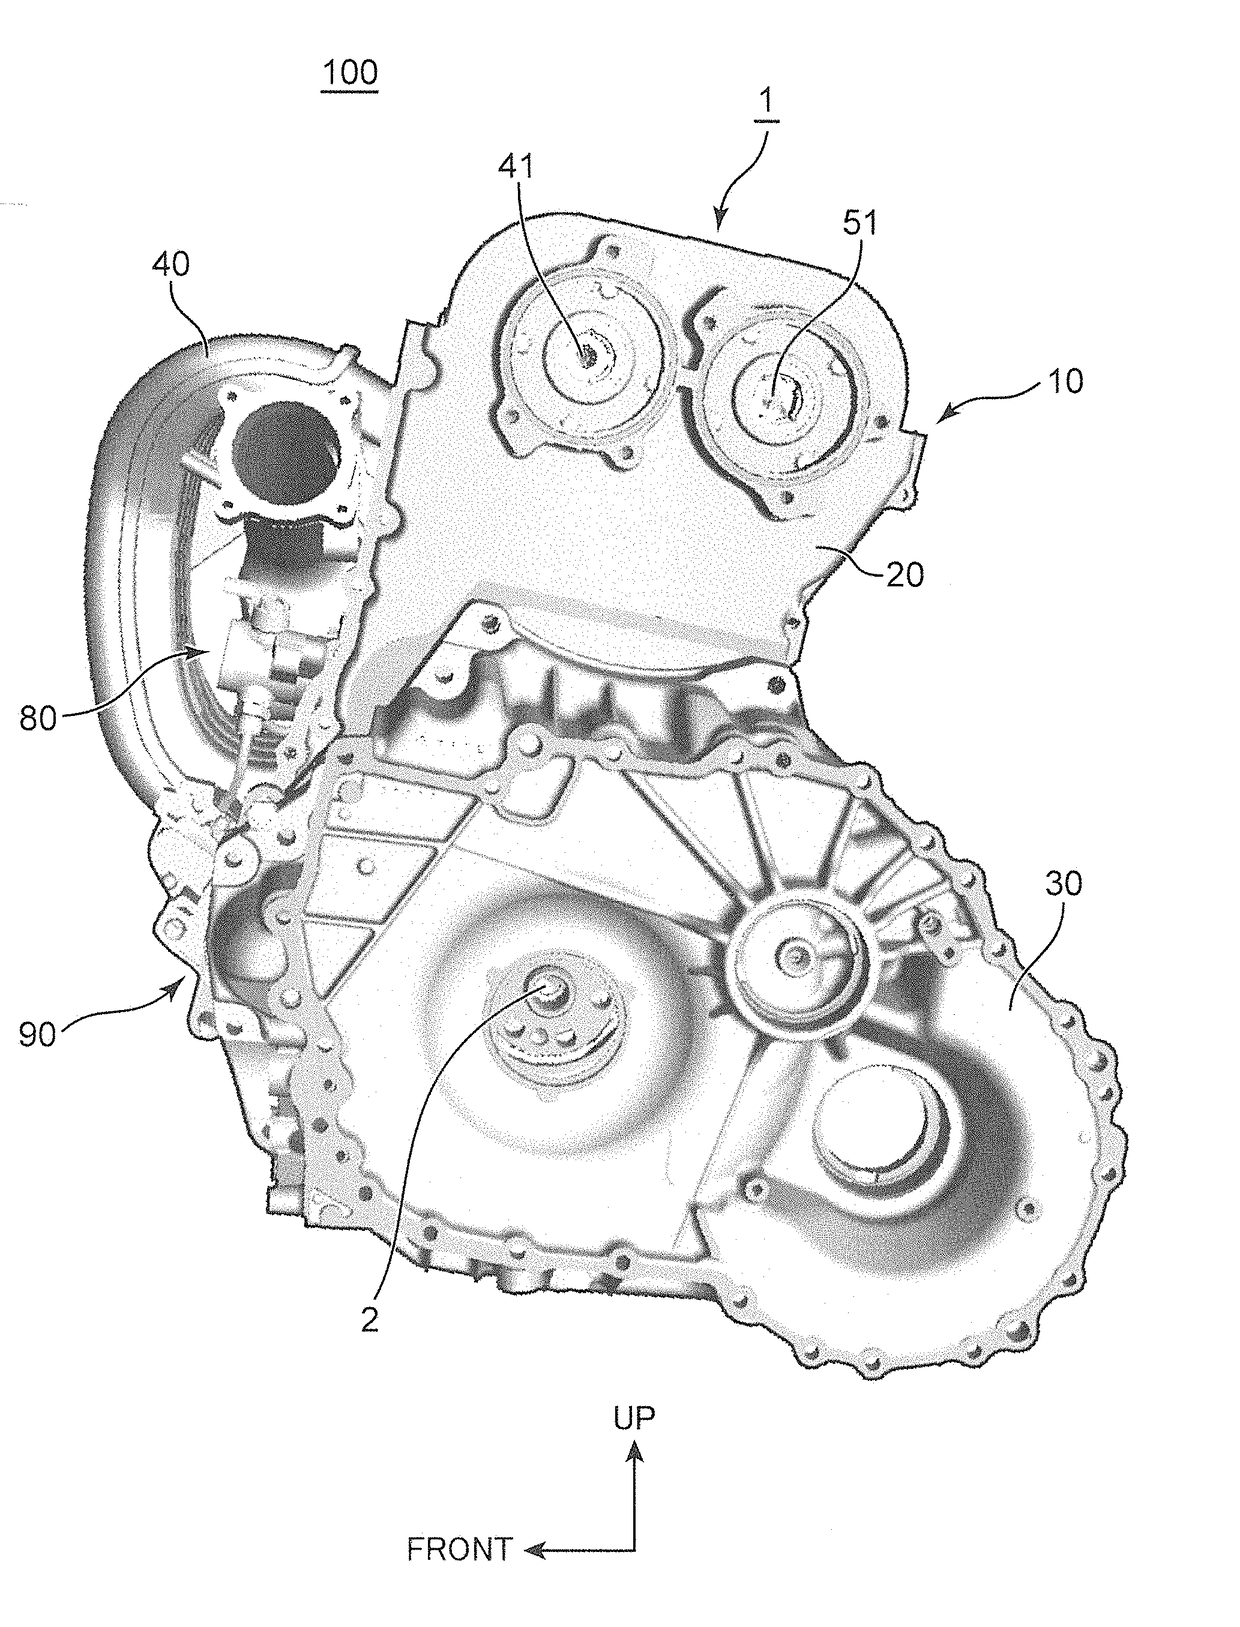 Accessory mounting structure for engine